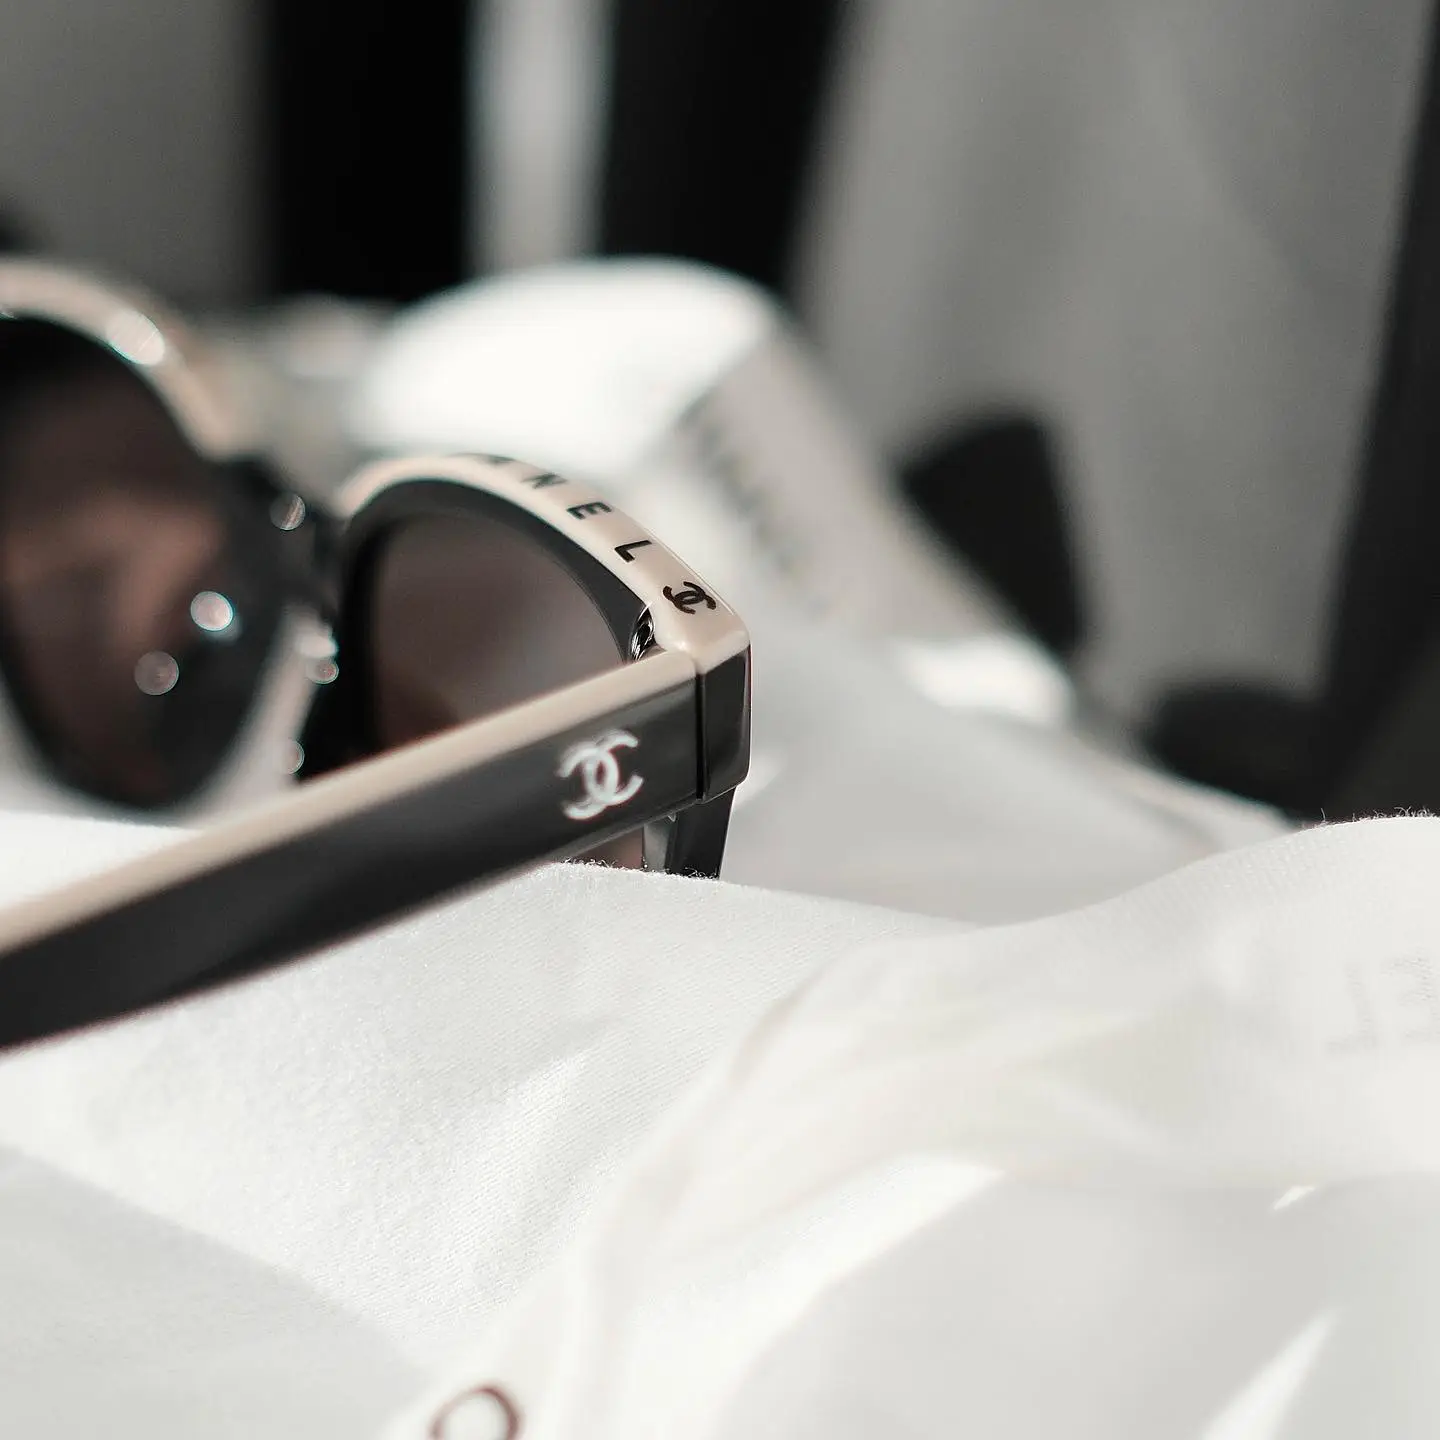 CHANEL sunglasses 5414, Gallery posted by Tipayarat_s